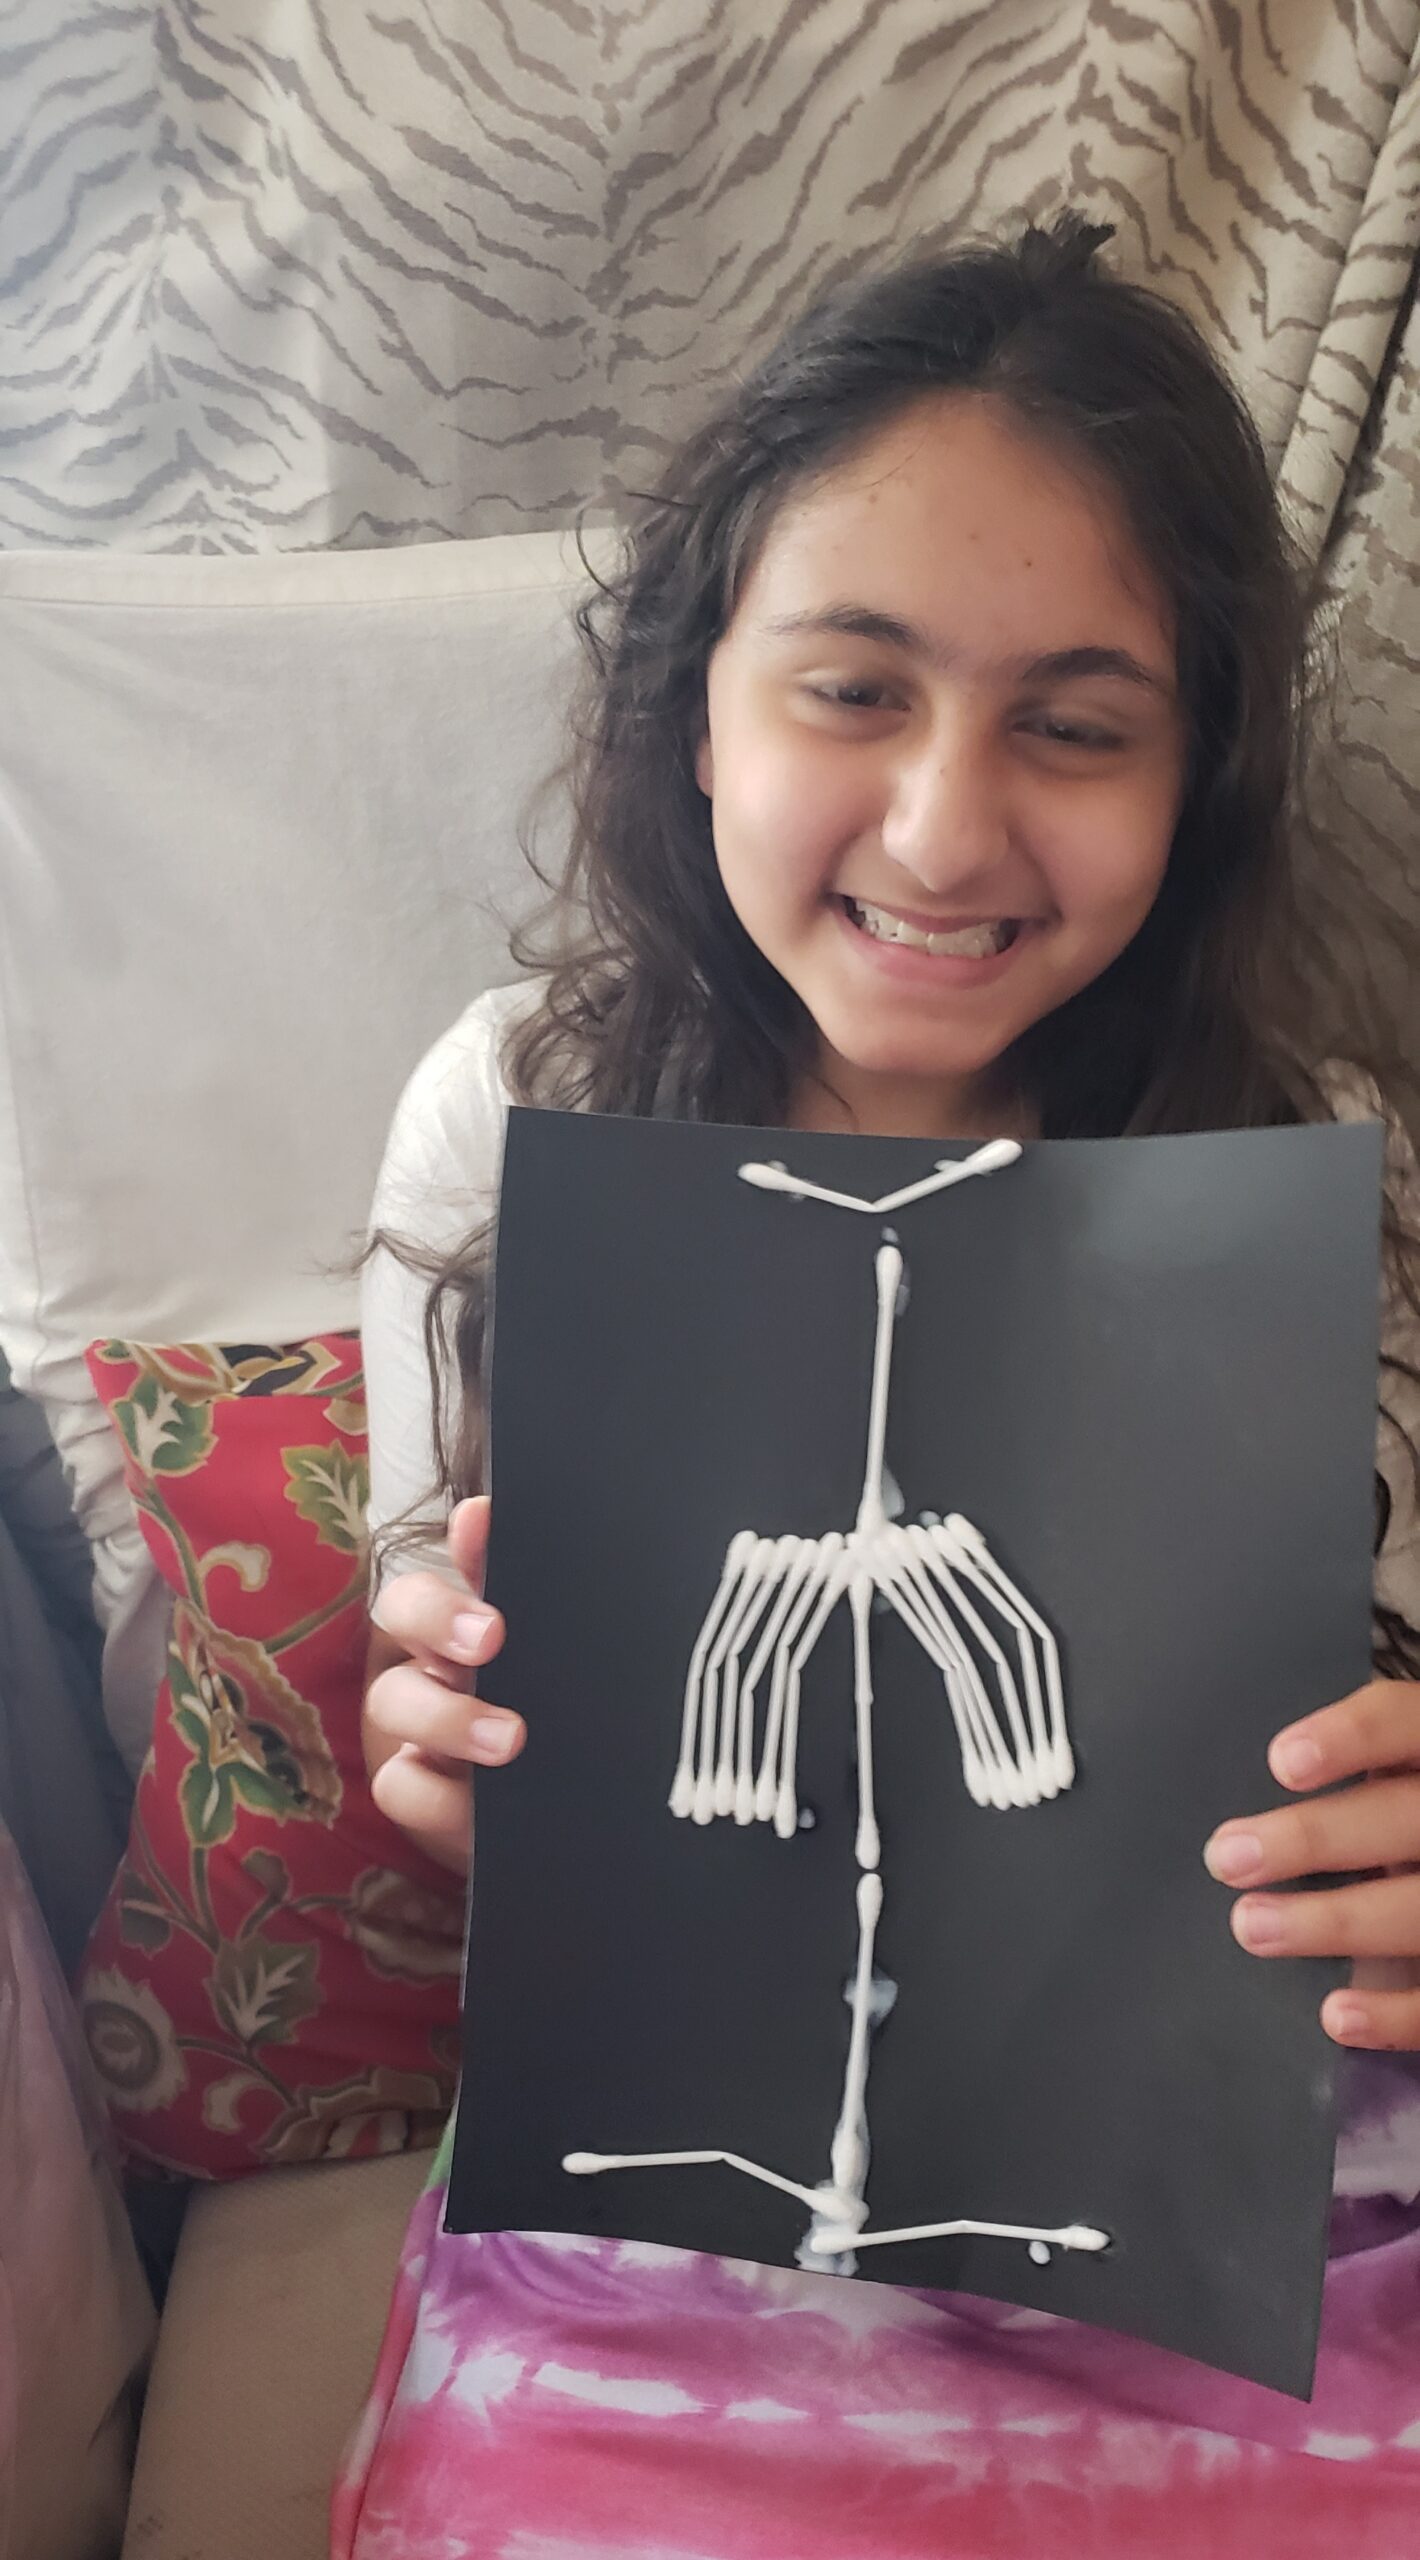 Child posing with x-ray made using household craft materials